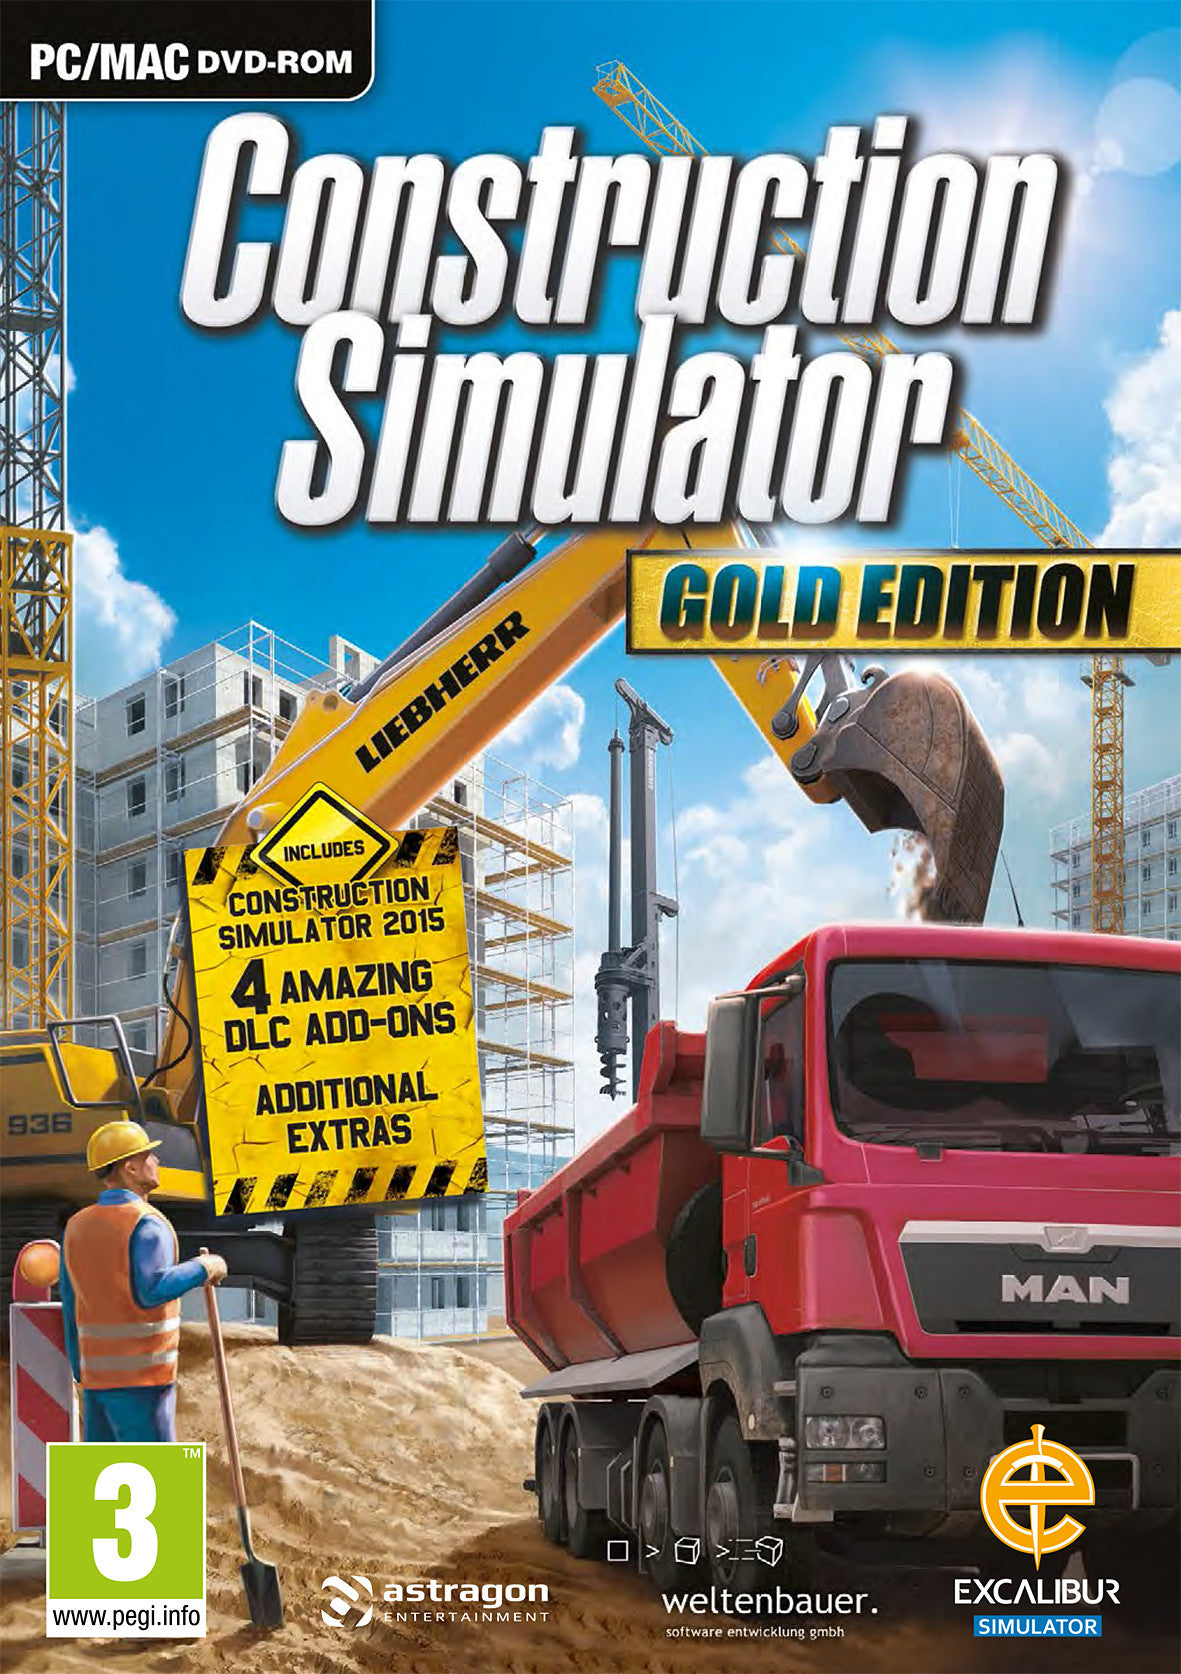 Free Construction Computer Games